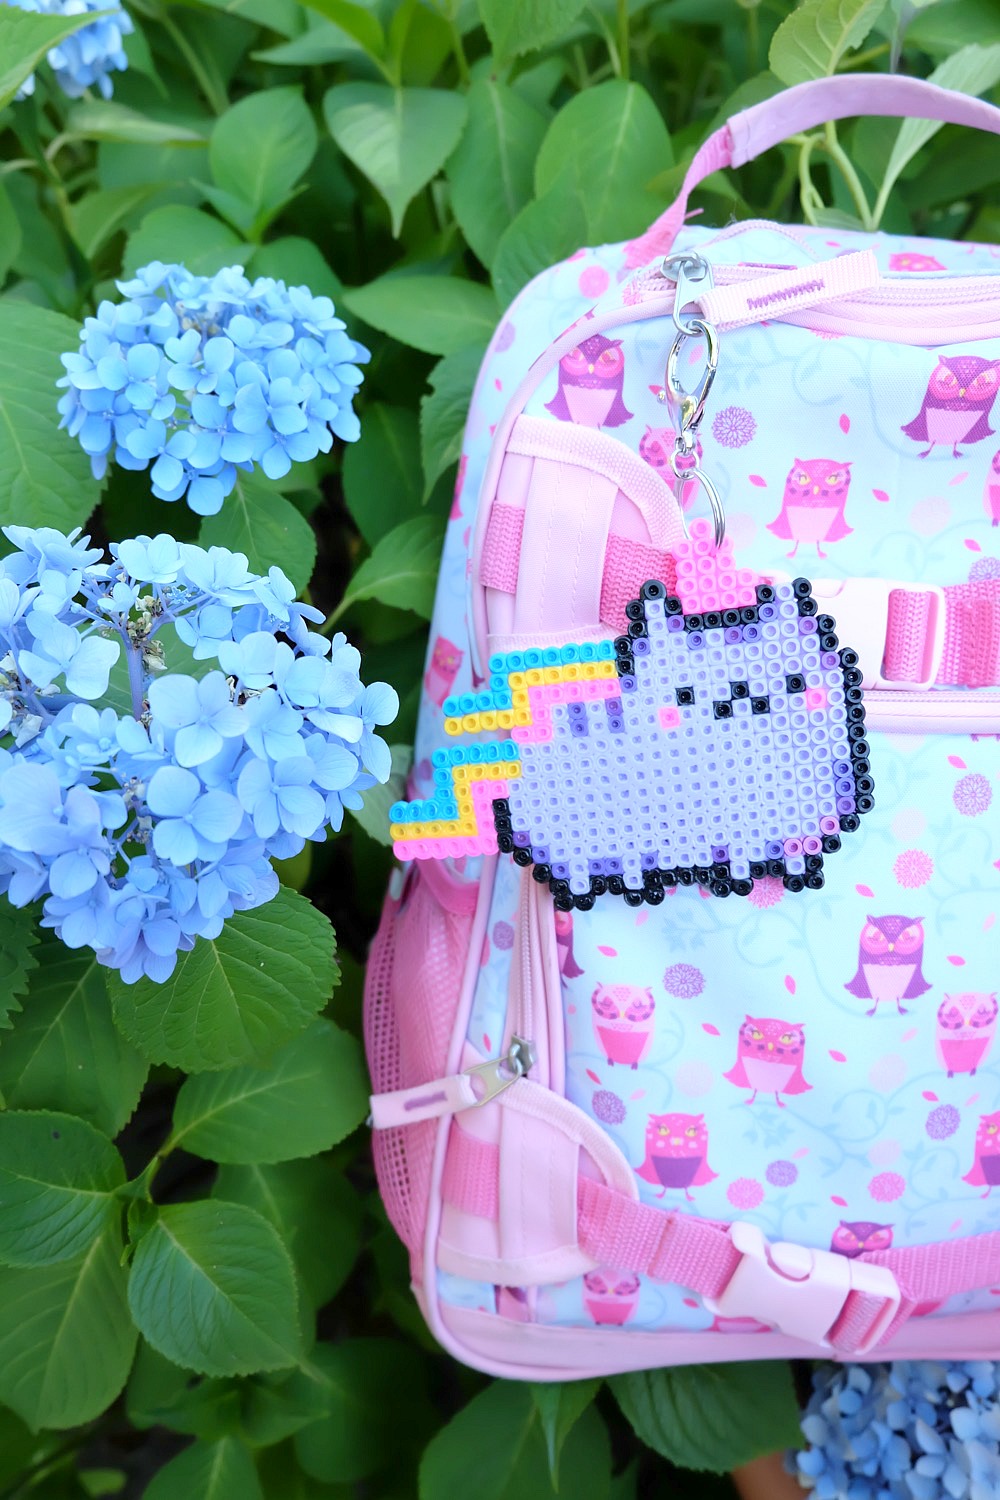 Bling out your kids backpack with this fun, creative, craft project! Make DIY Perler Bead Zipper Pulls that are perfect for back to school fashion accessories! A fun kids craft using hama beads! 